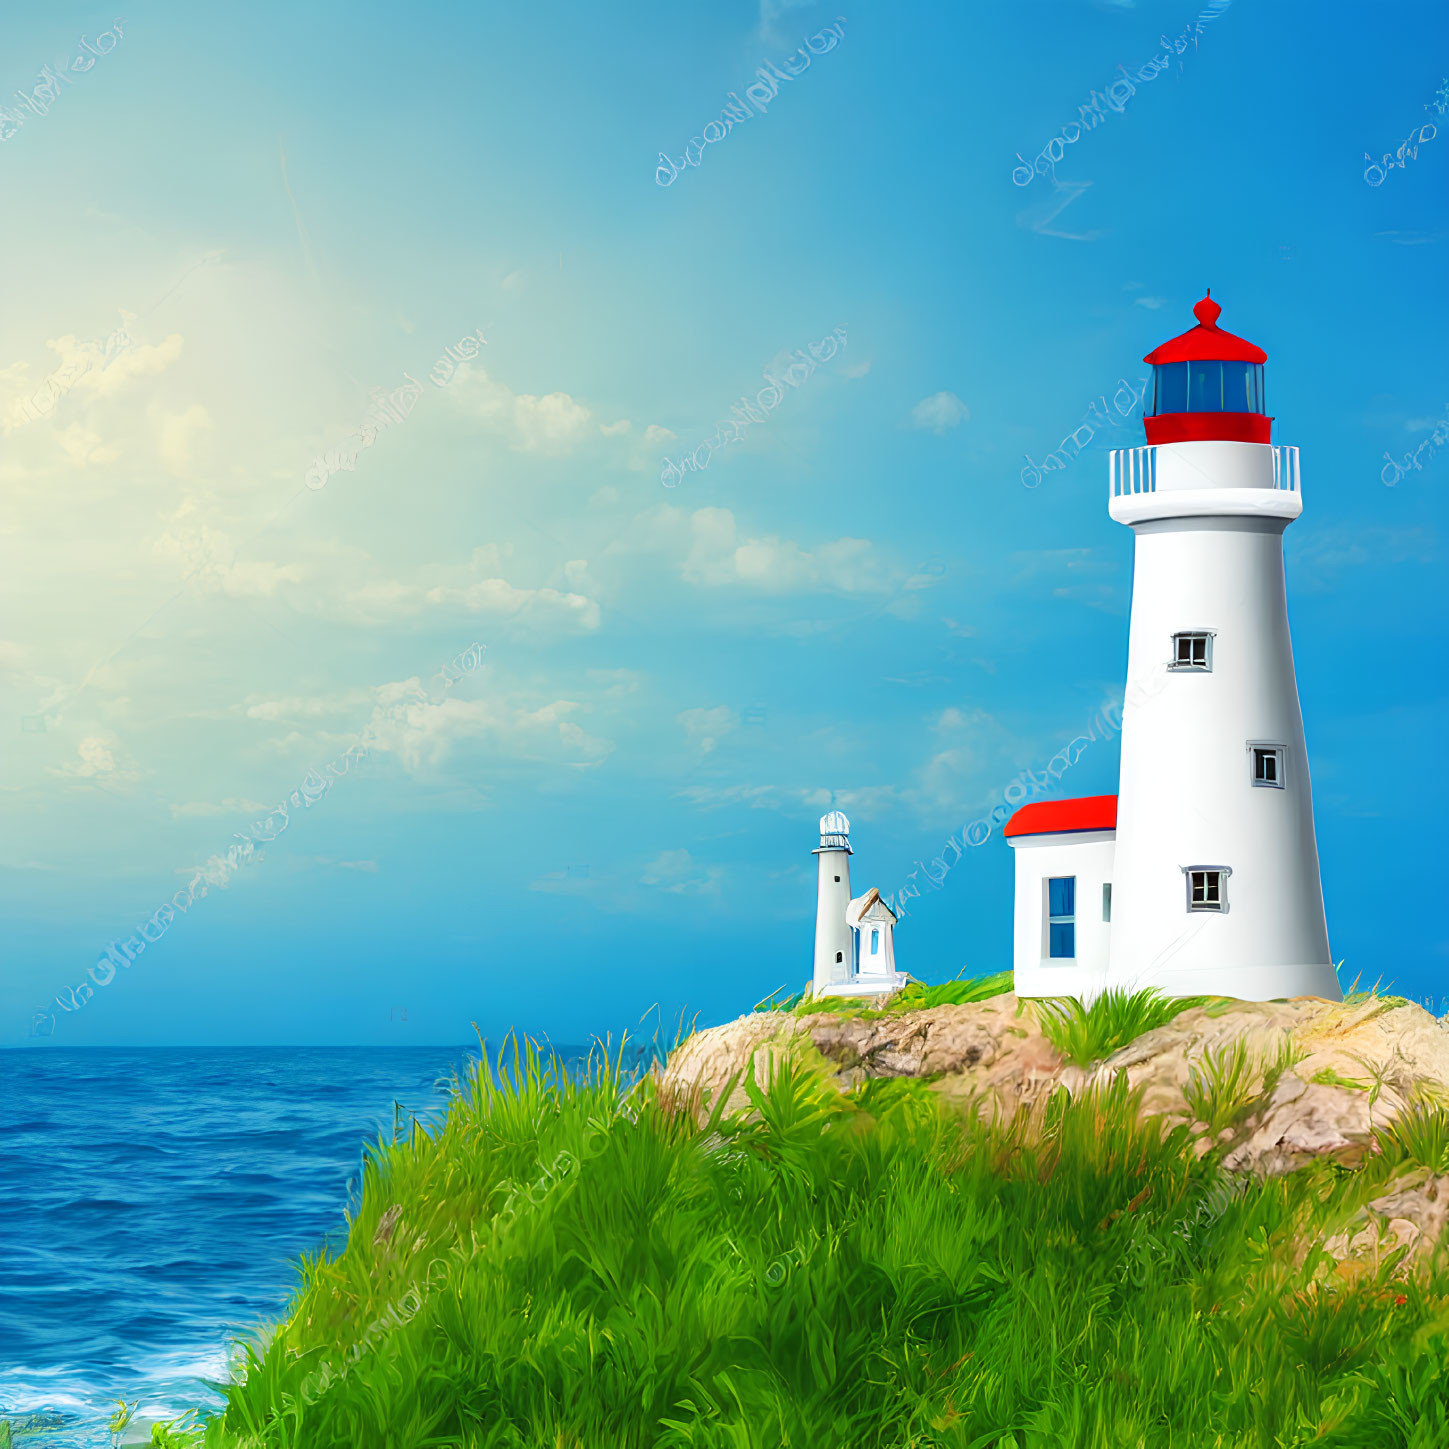 White Lighthouse with Red Cap on Coastal Cliff Illustration